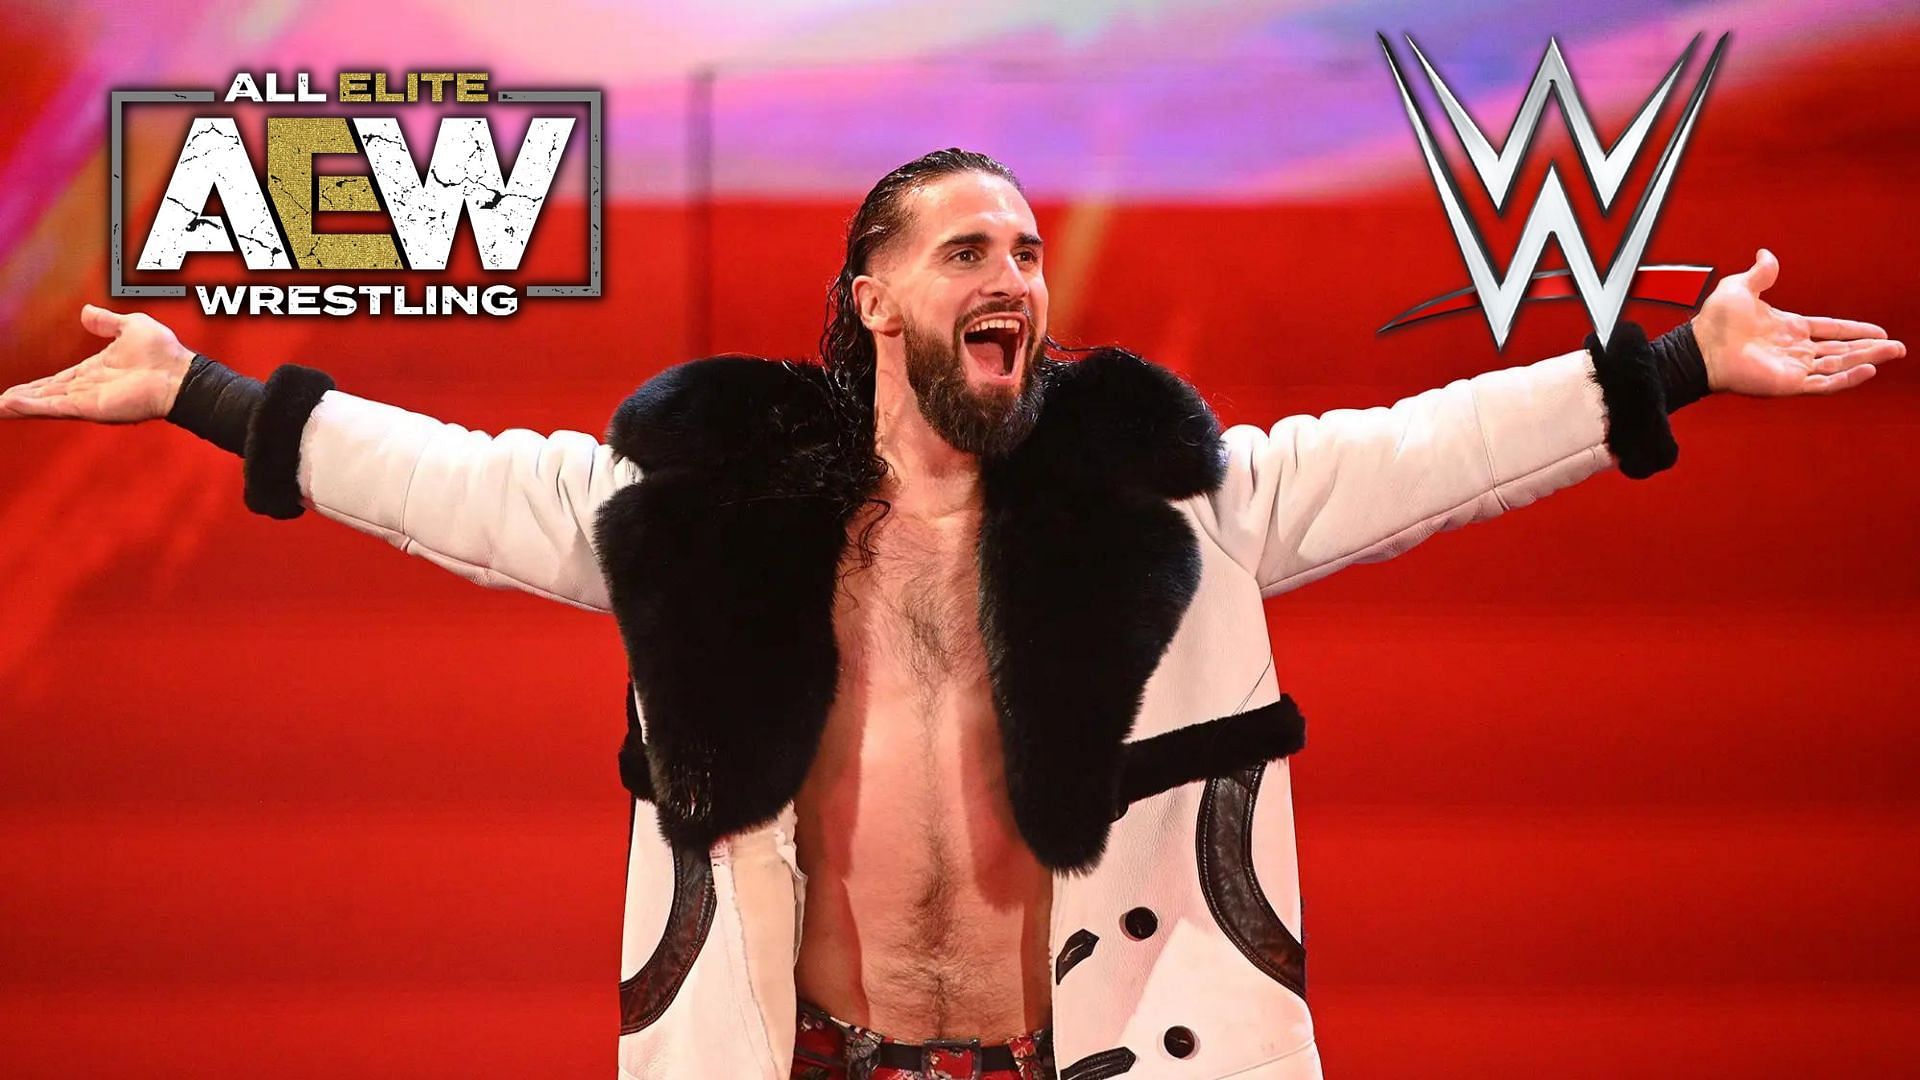 Will Seth Rollins face off with an AEW star in the future?